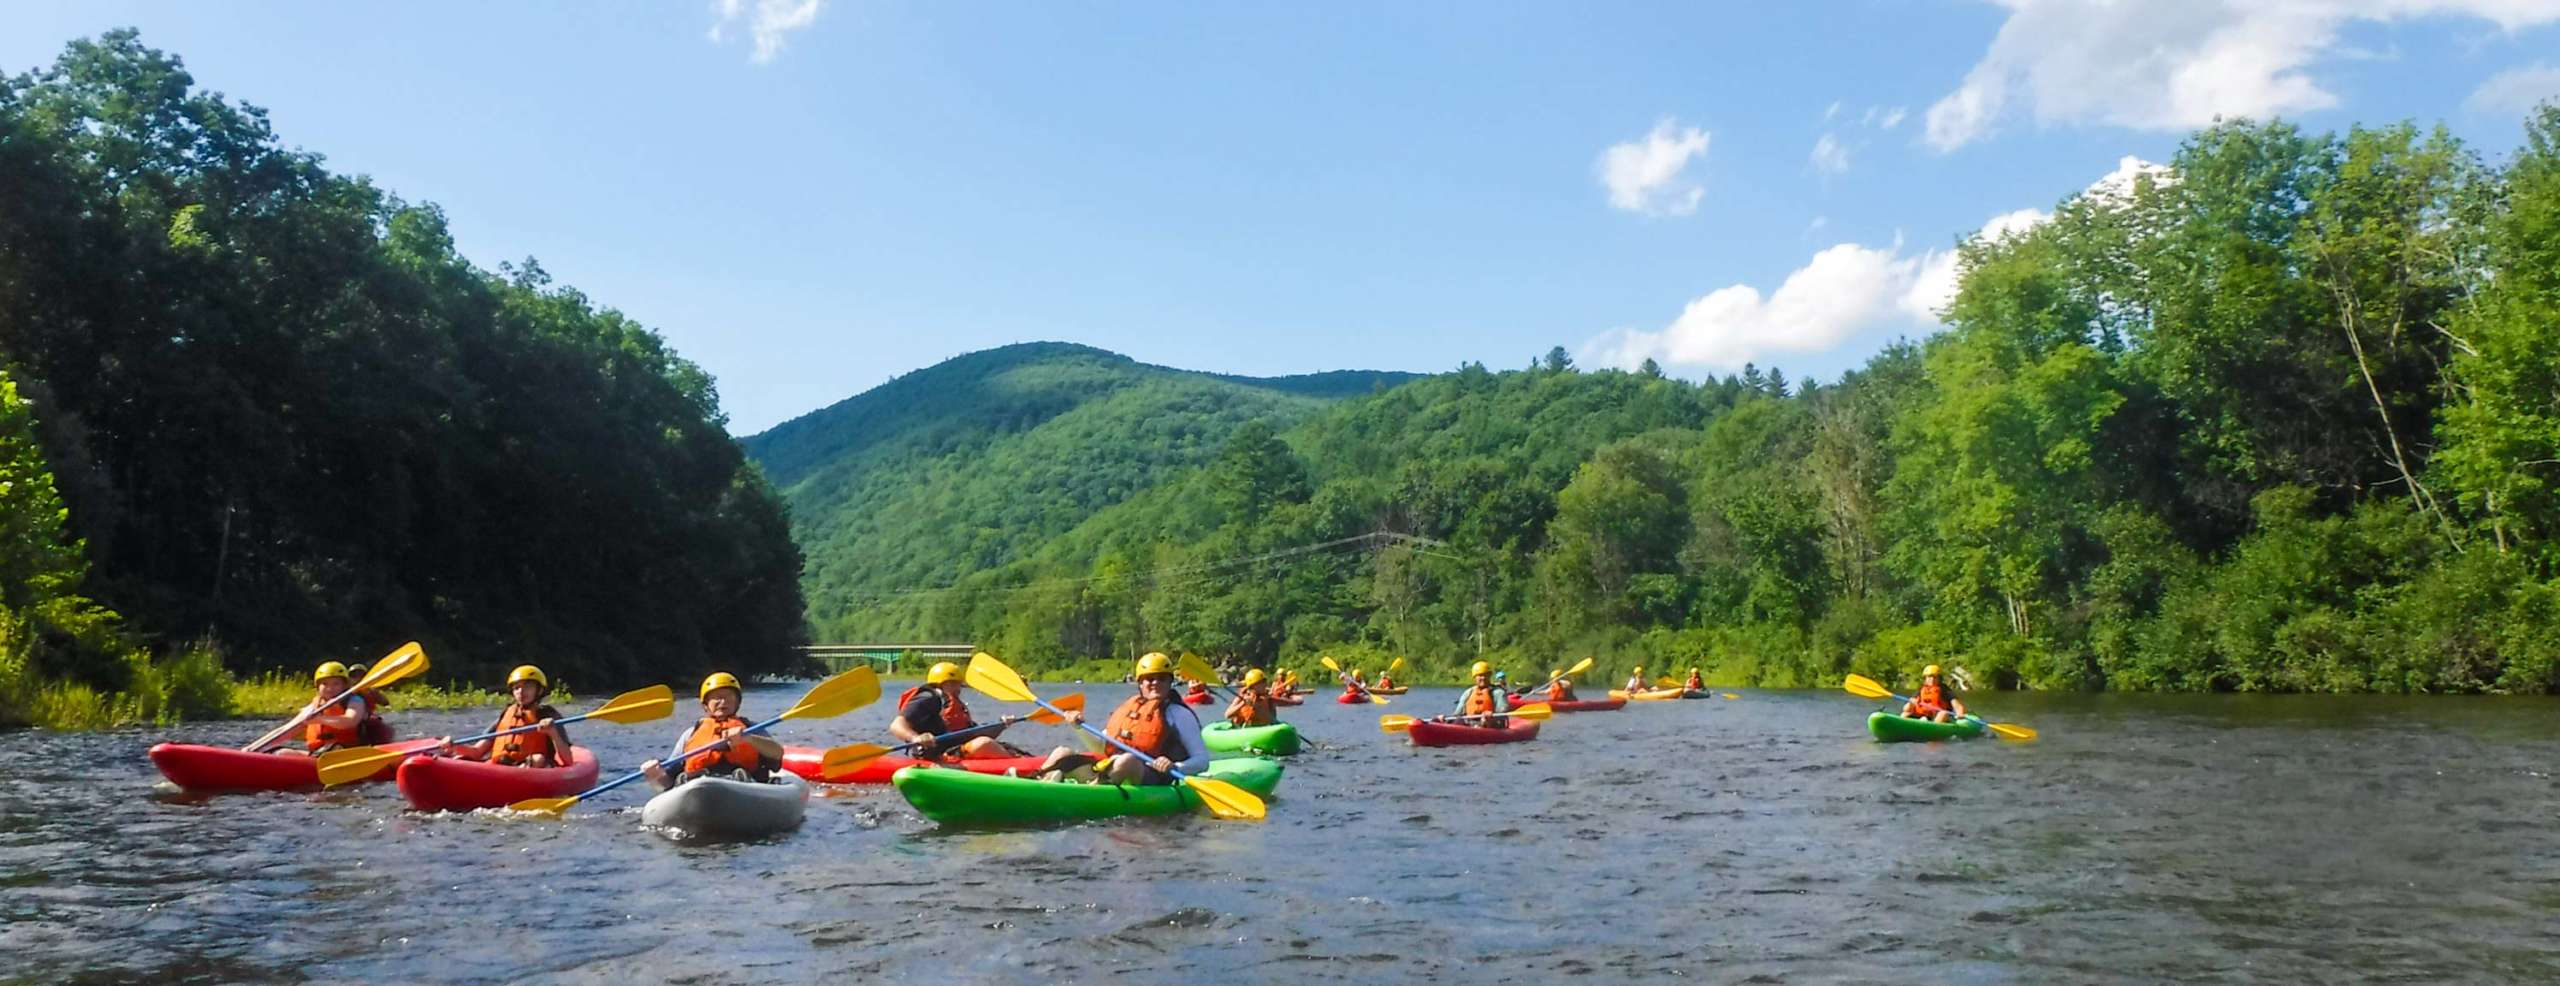 Group of kayakers on a calm river with green mountains in background